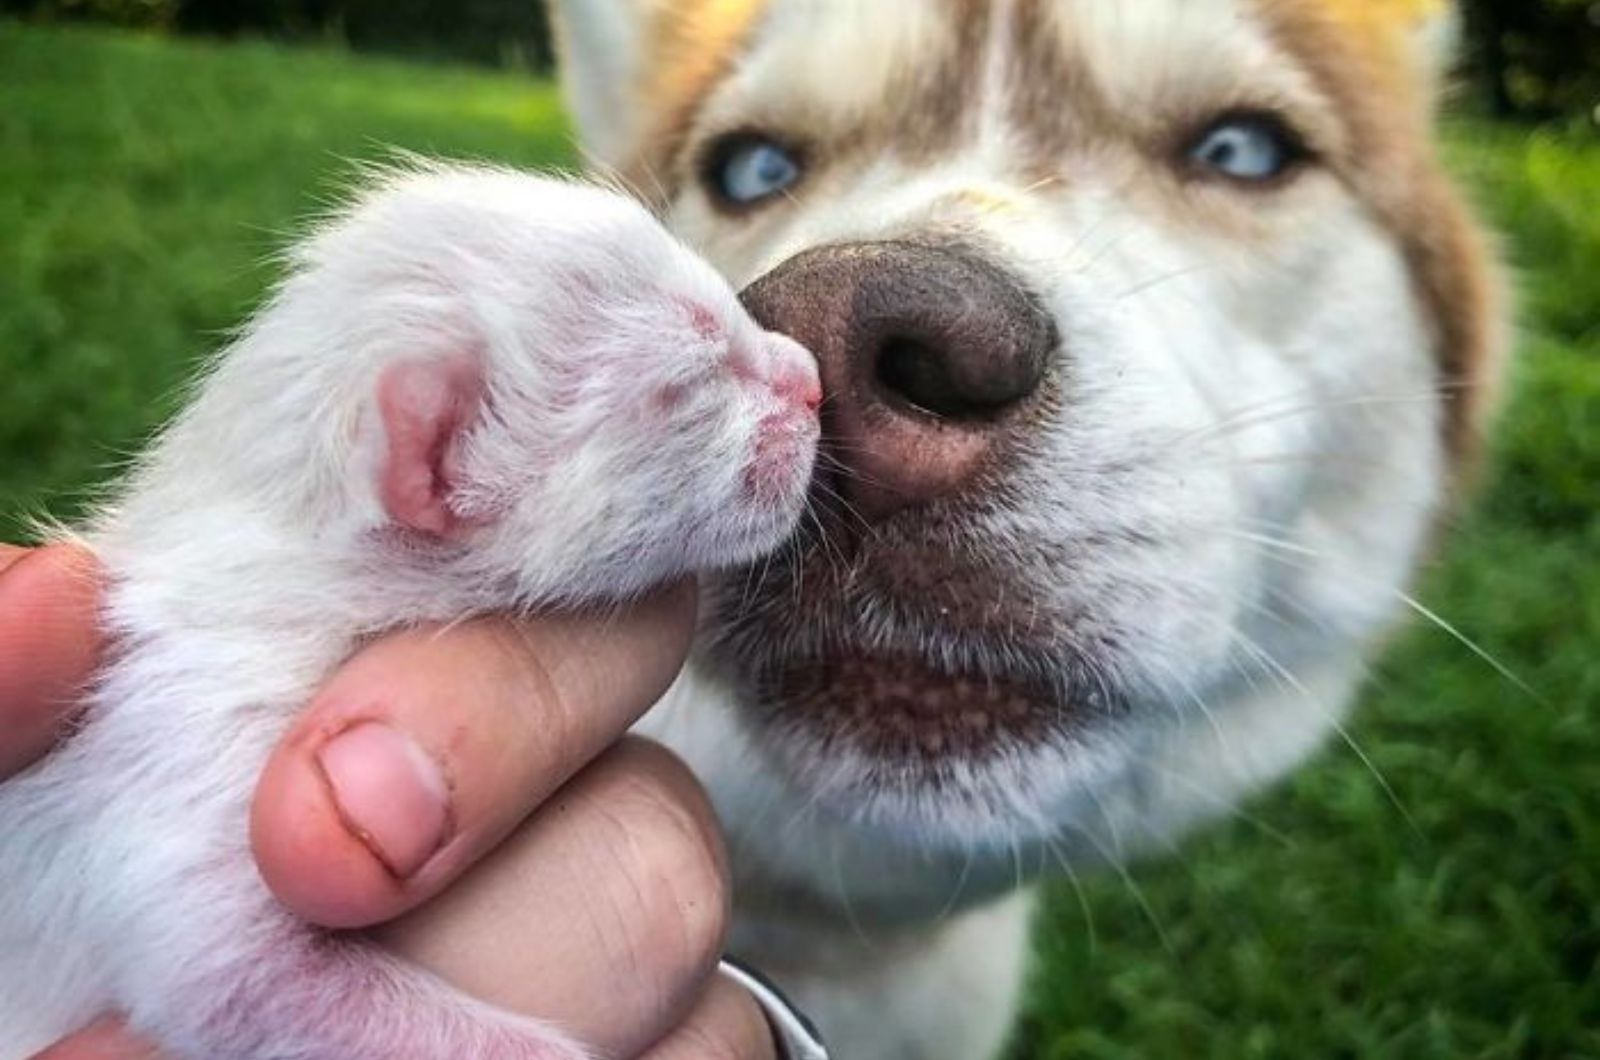 close-up photo of husky and a kitten